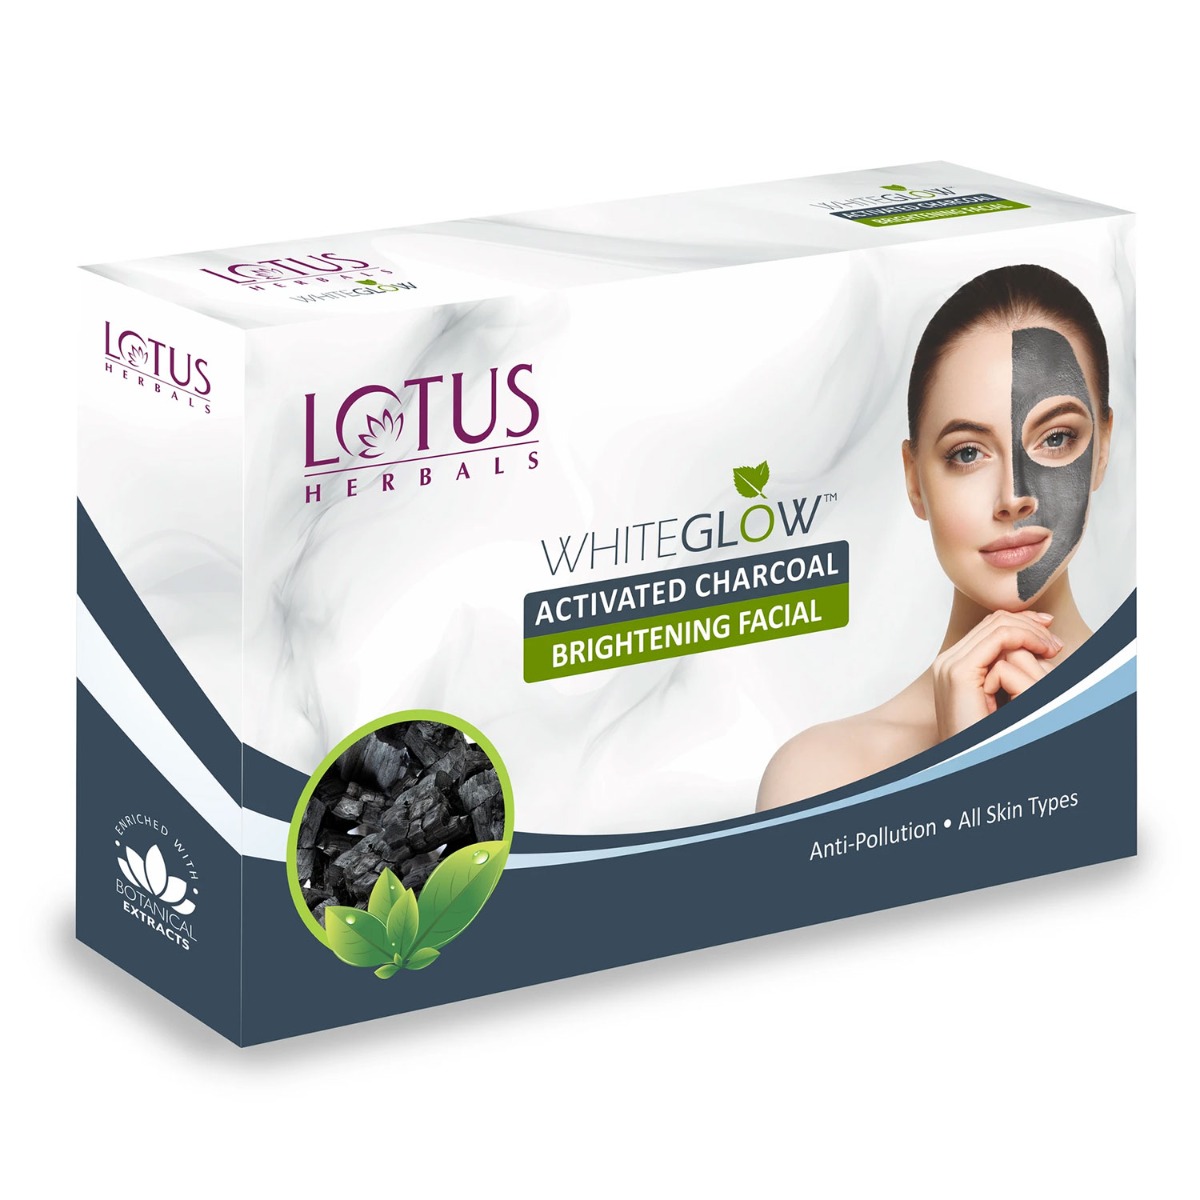 Lotus Herbals WhiteGlow Activated Charcoal 4 in 1 Facial kit